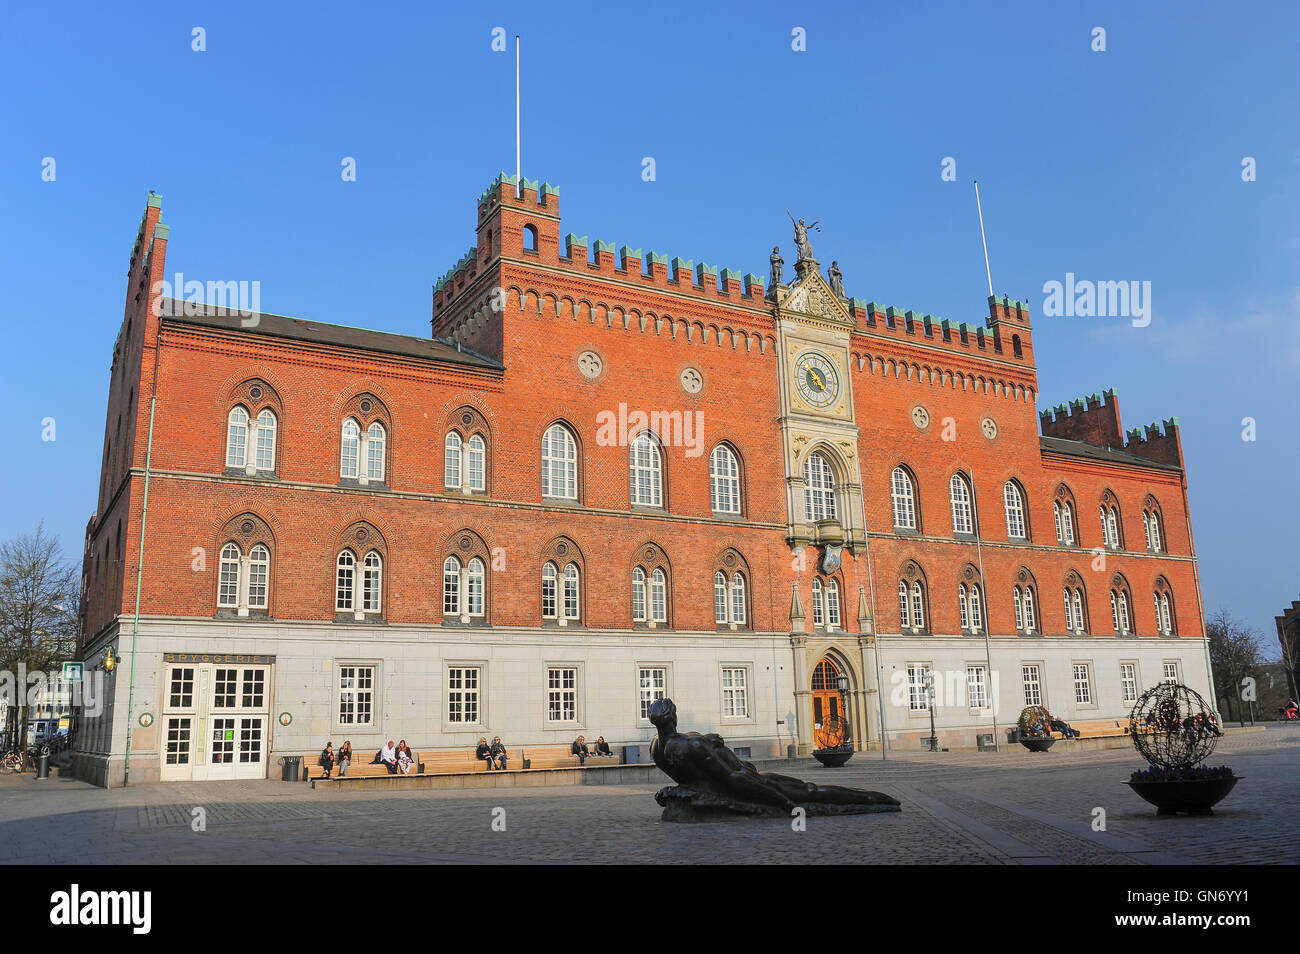 Odense City Hall High Resolution Stock Photography and Images - Alamy